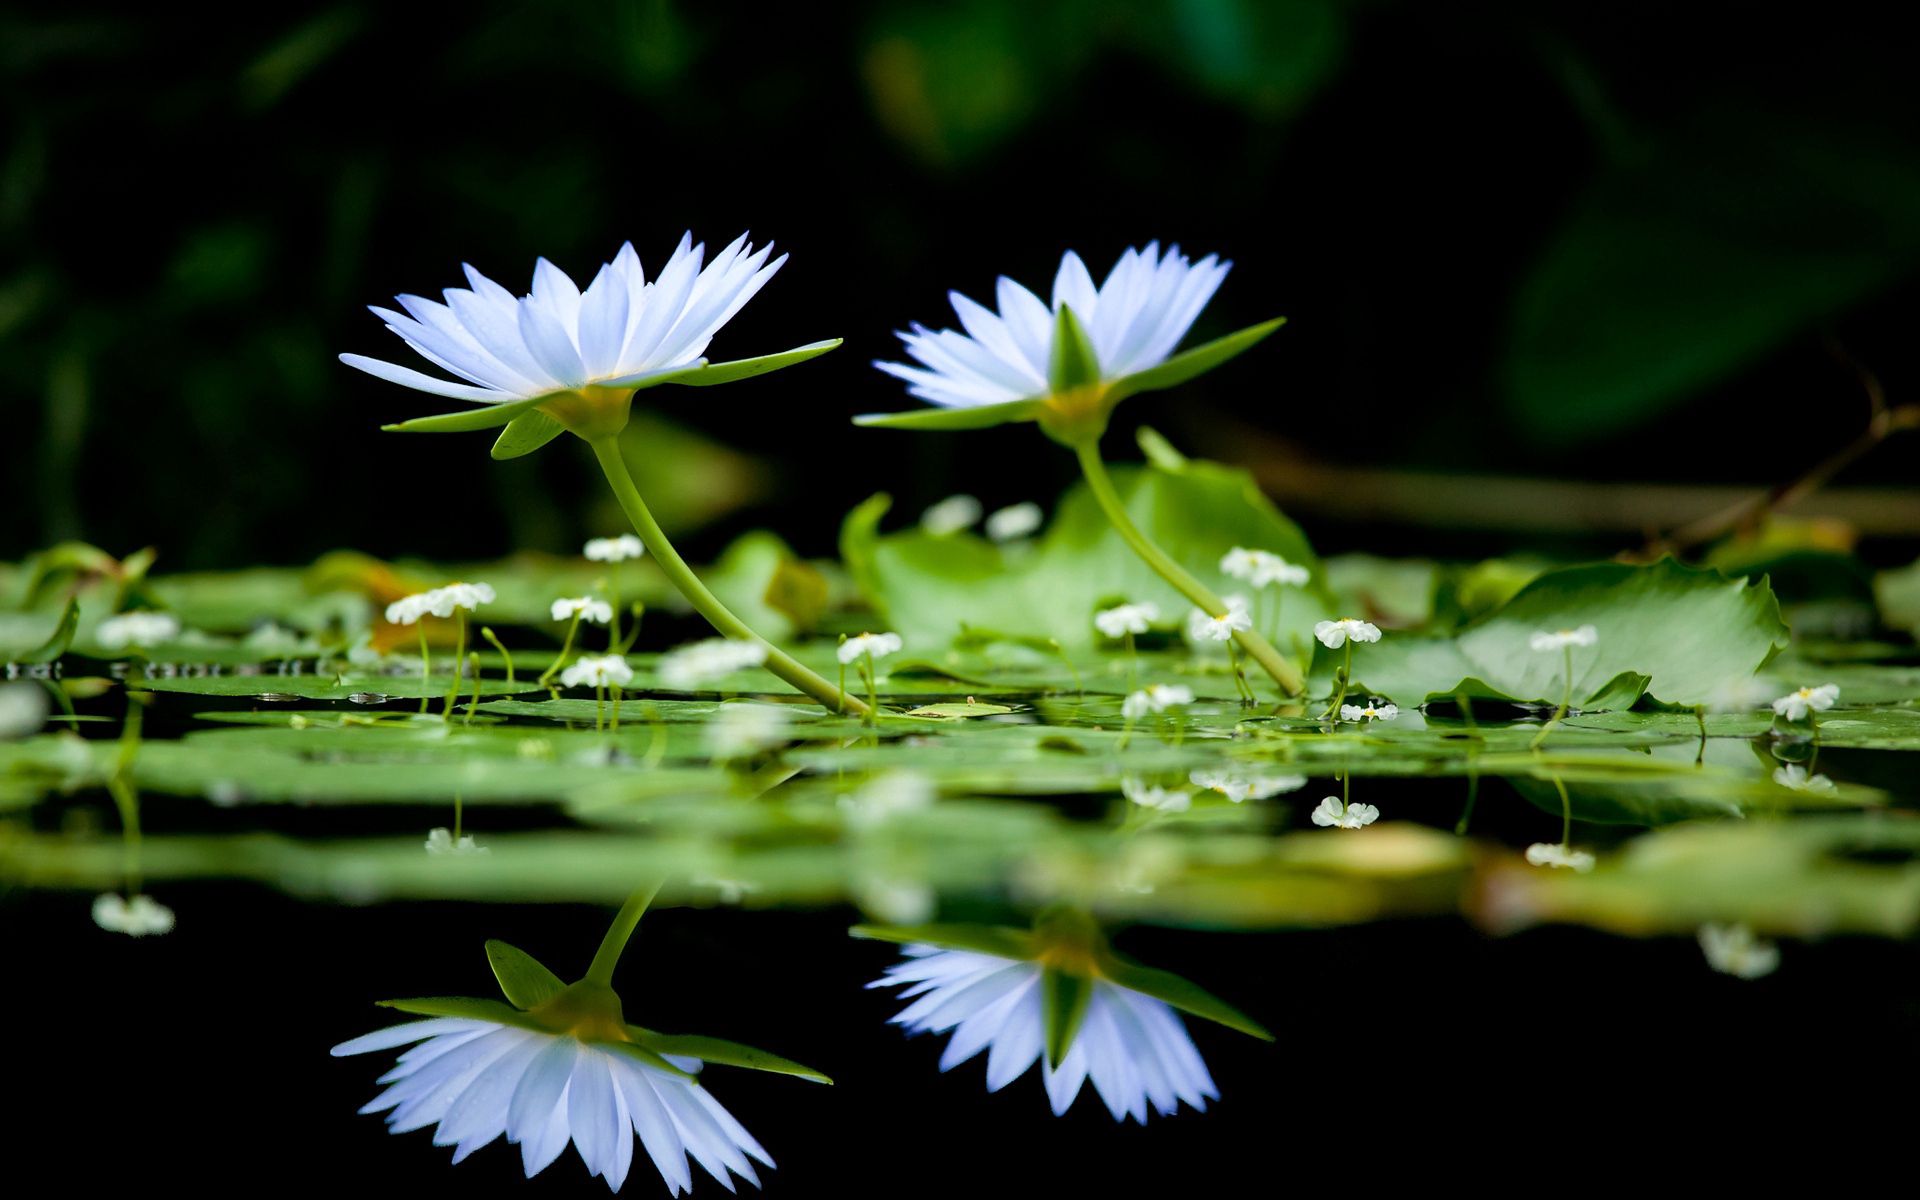 reflection, surface, smooth, water, greens, flowers